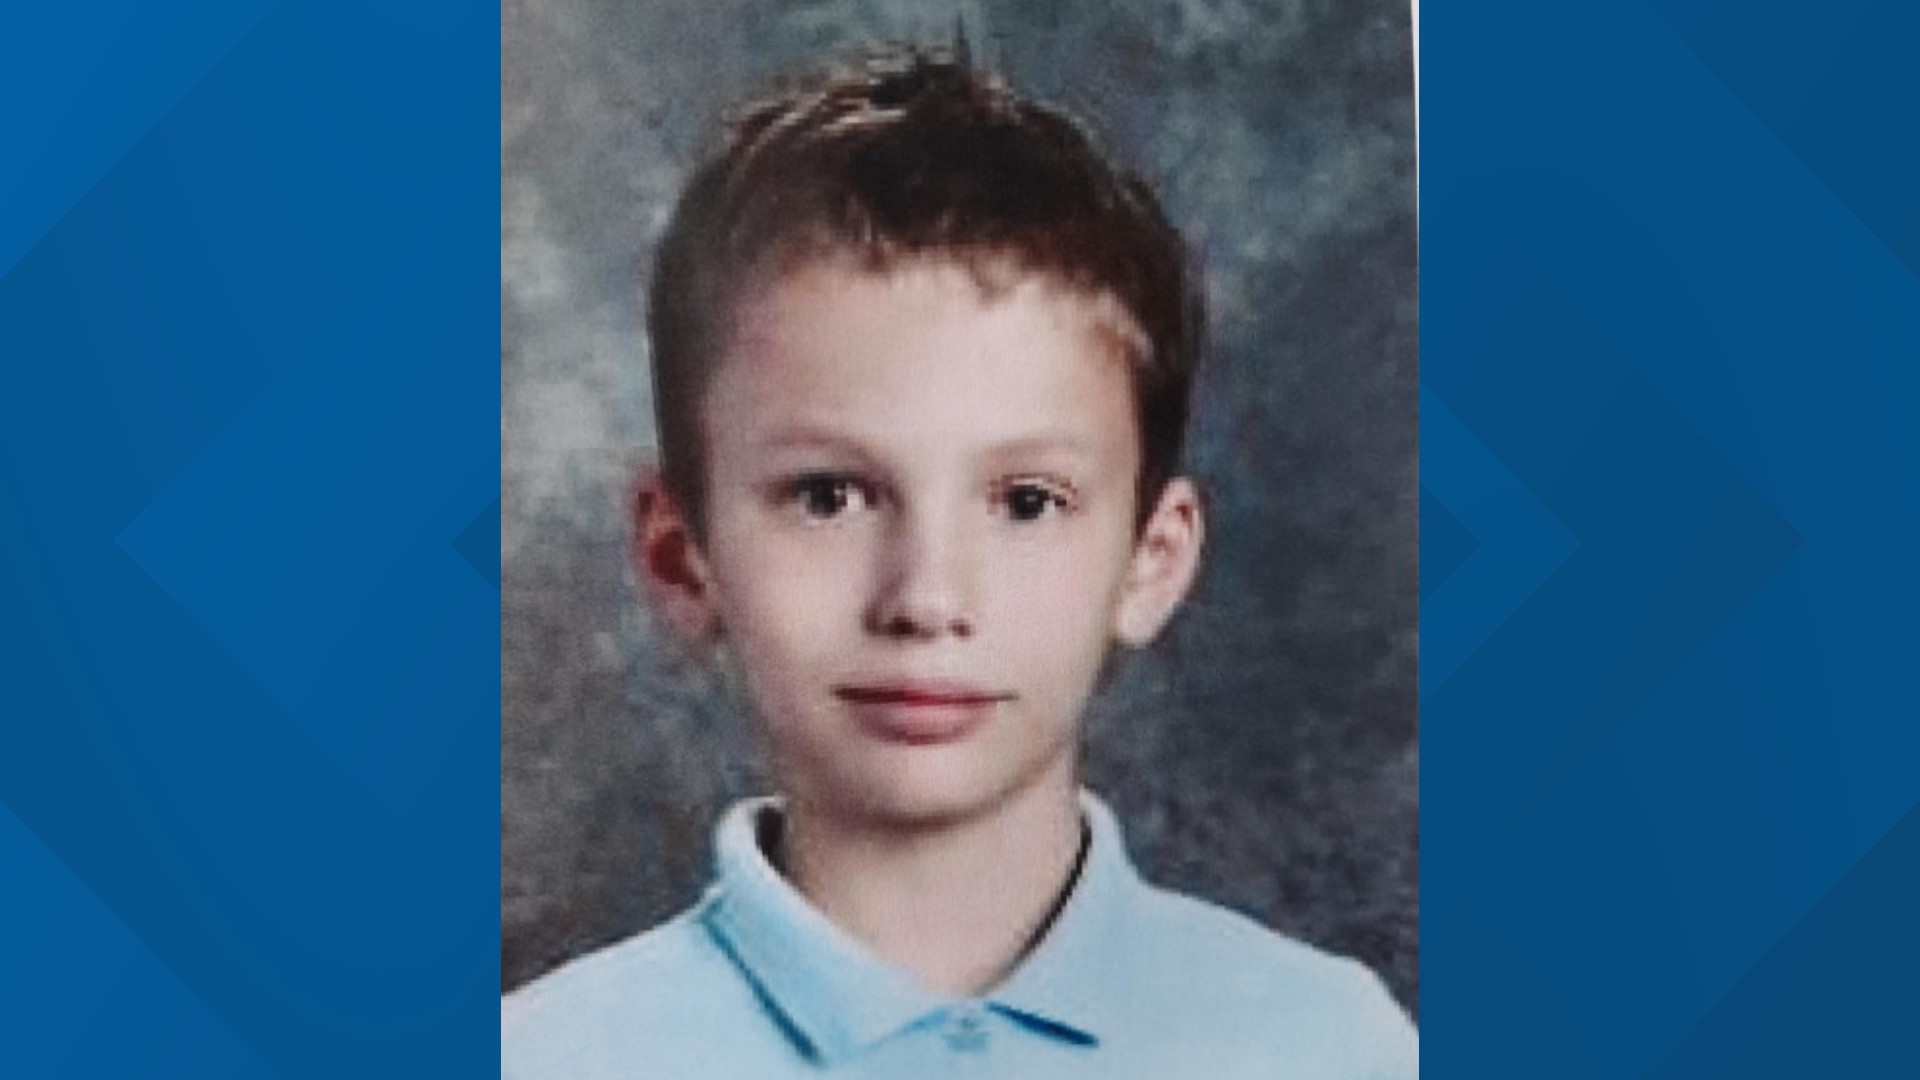 11-year-old Eli Nelson was found just before 6:30 p.m. on Friday night.